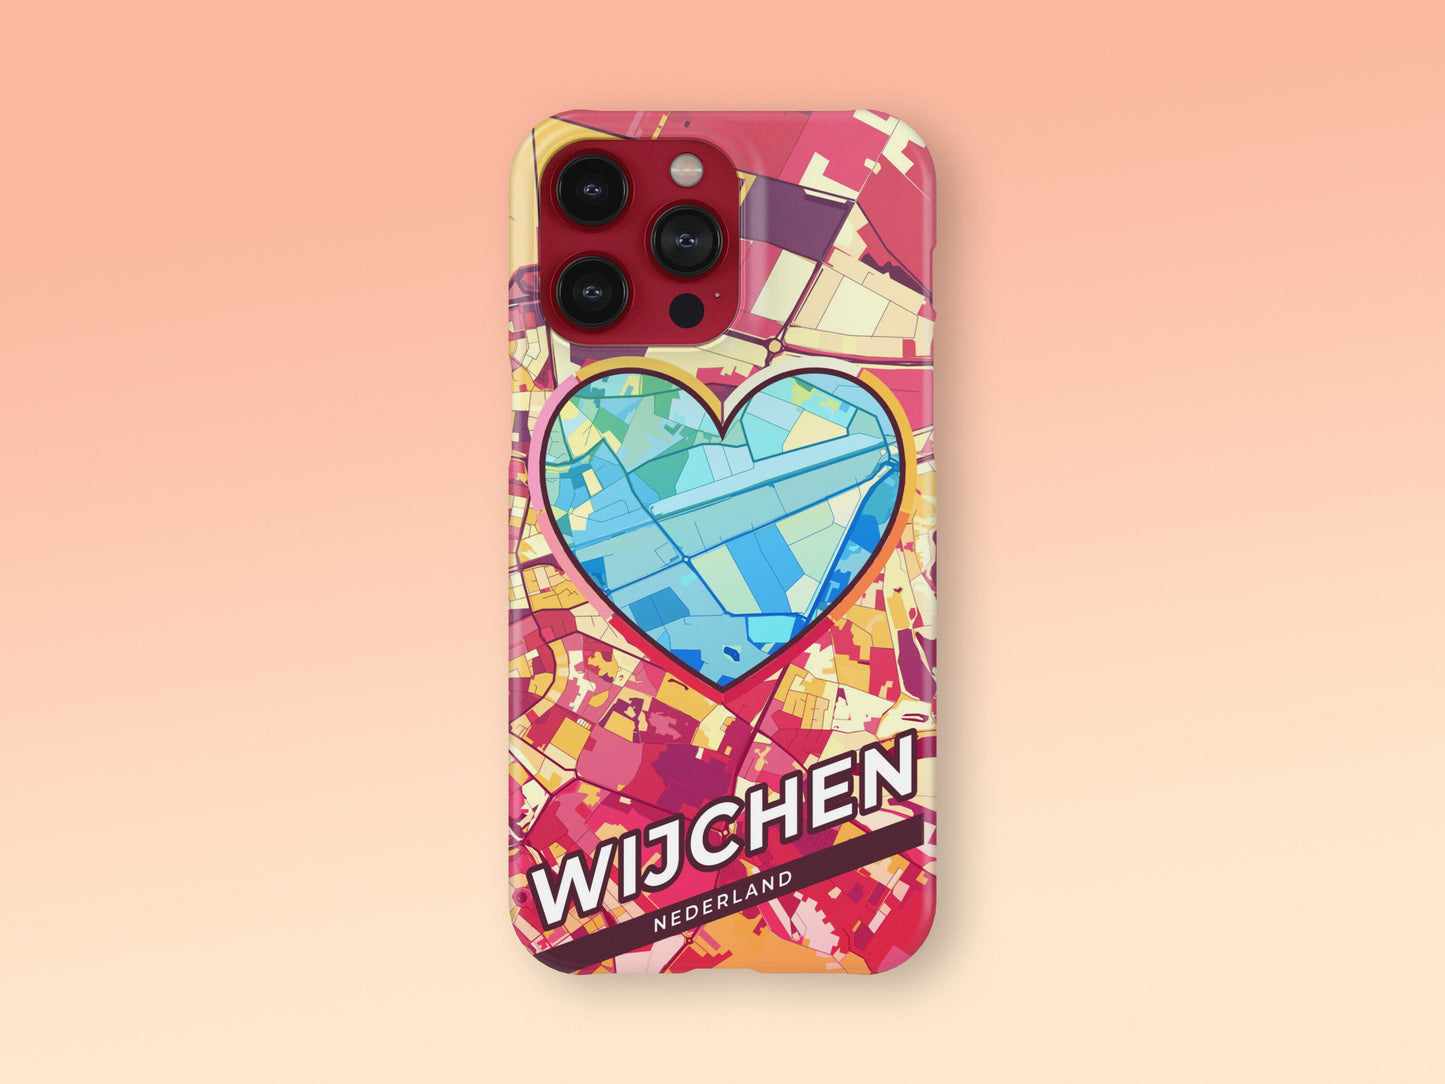 Wijchen Netherlands slim phone case with colorful icon 2